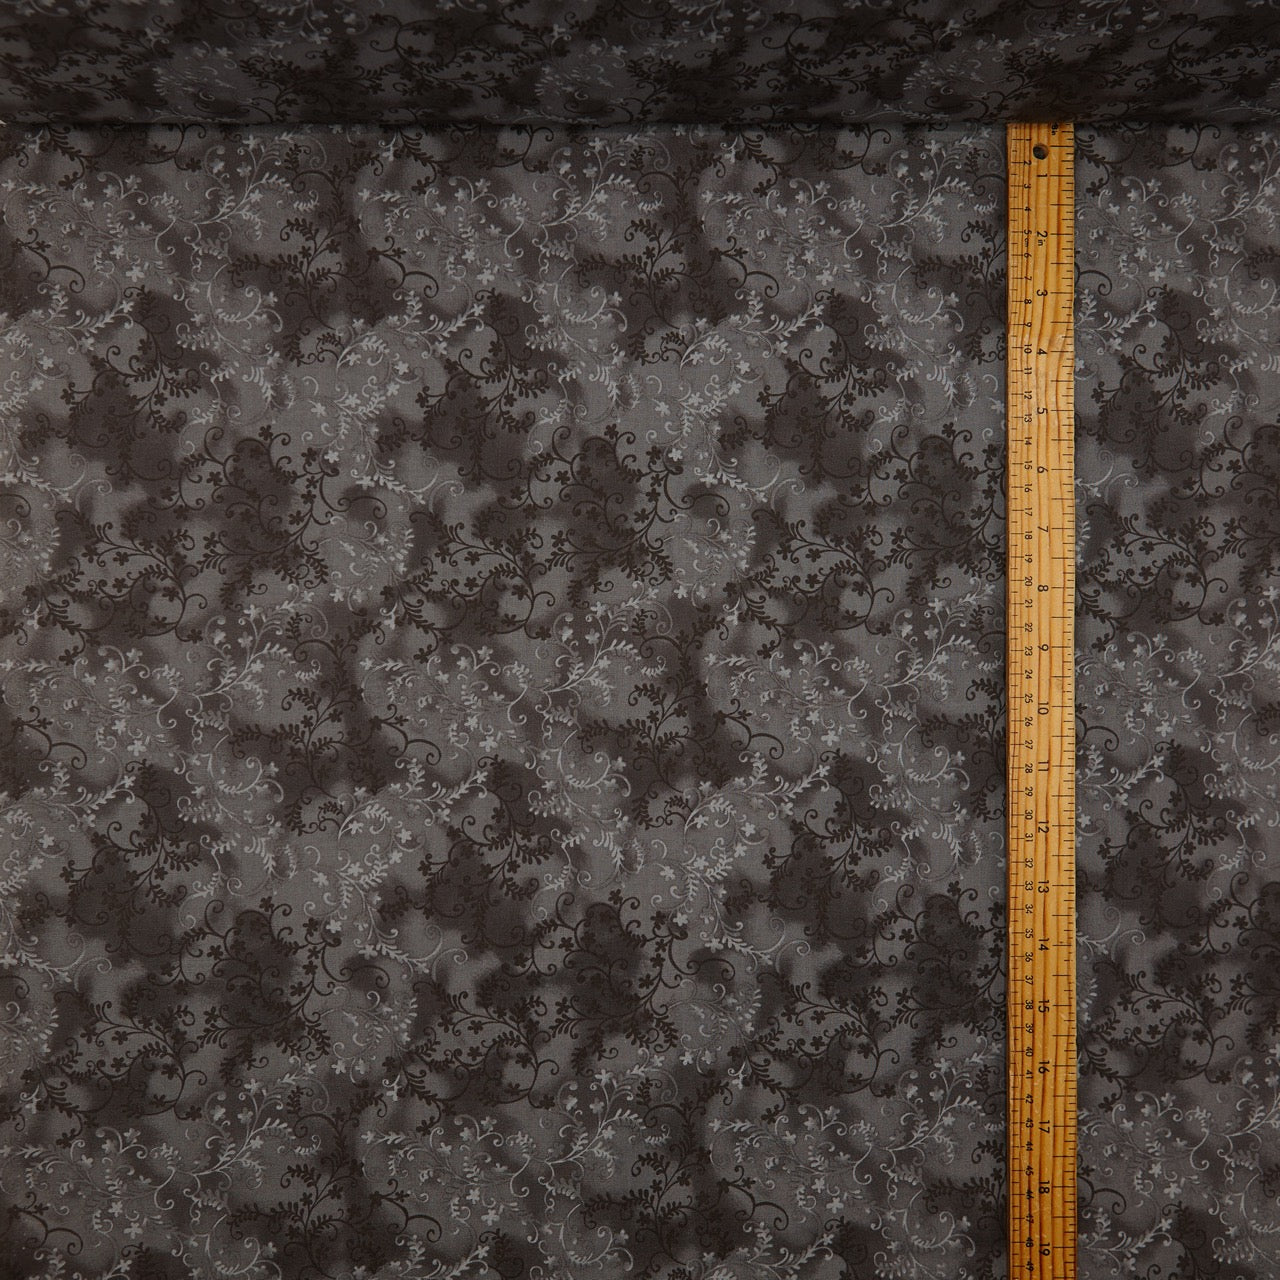 Quilting Cotton - Floral - Charcoal Flourish (measured)